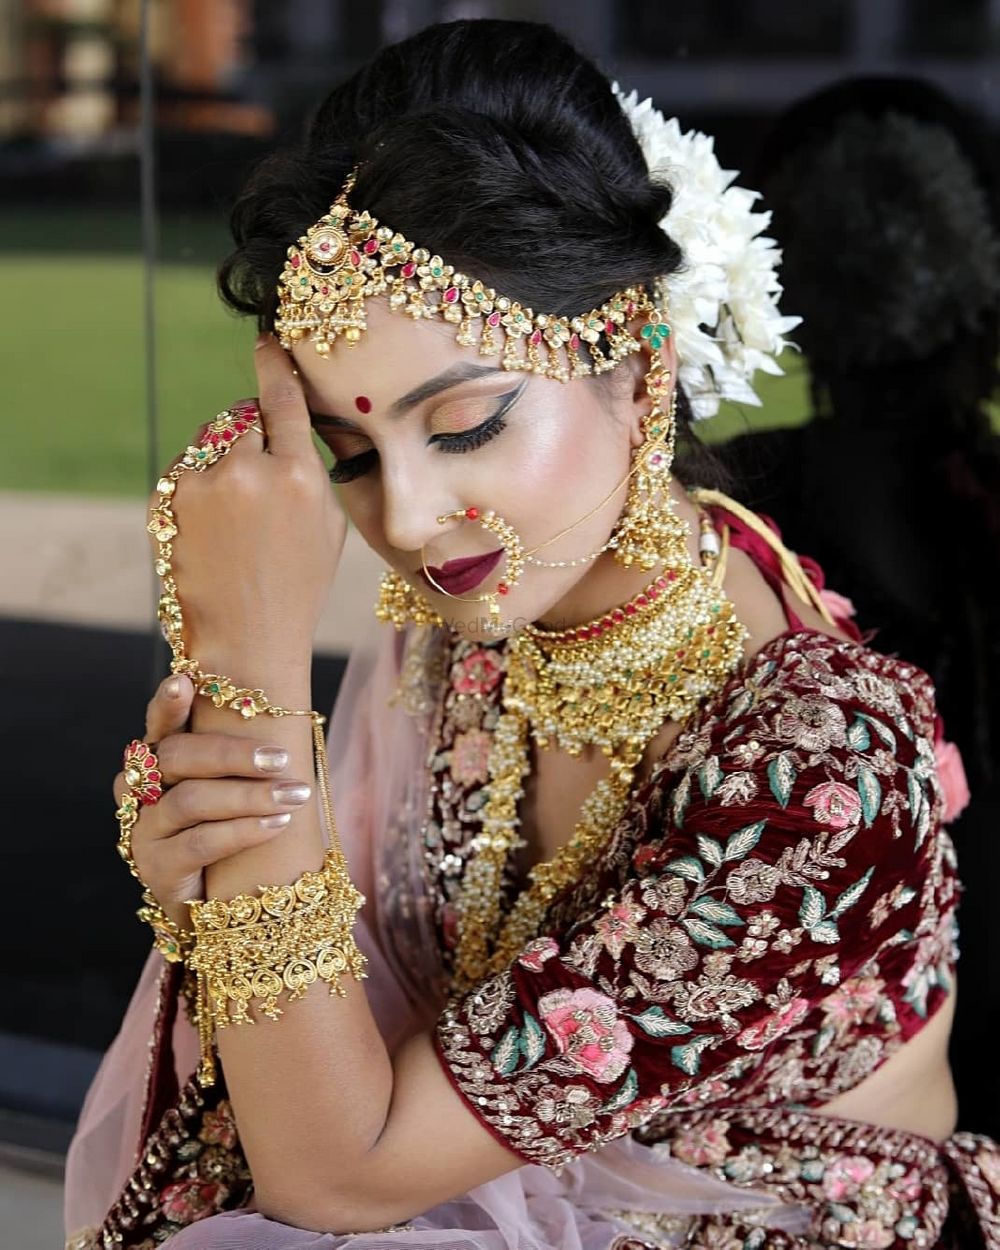 Photo From Brides ❤️ - By Poonam Bridal Makeover